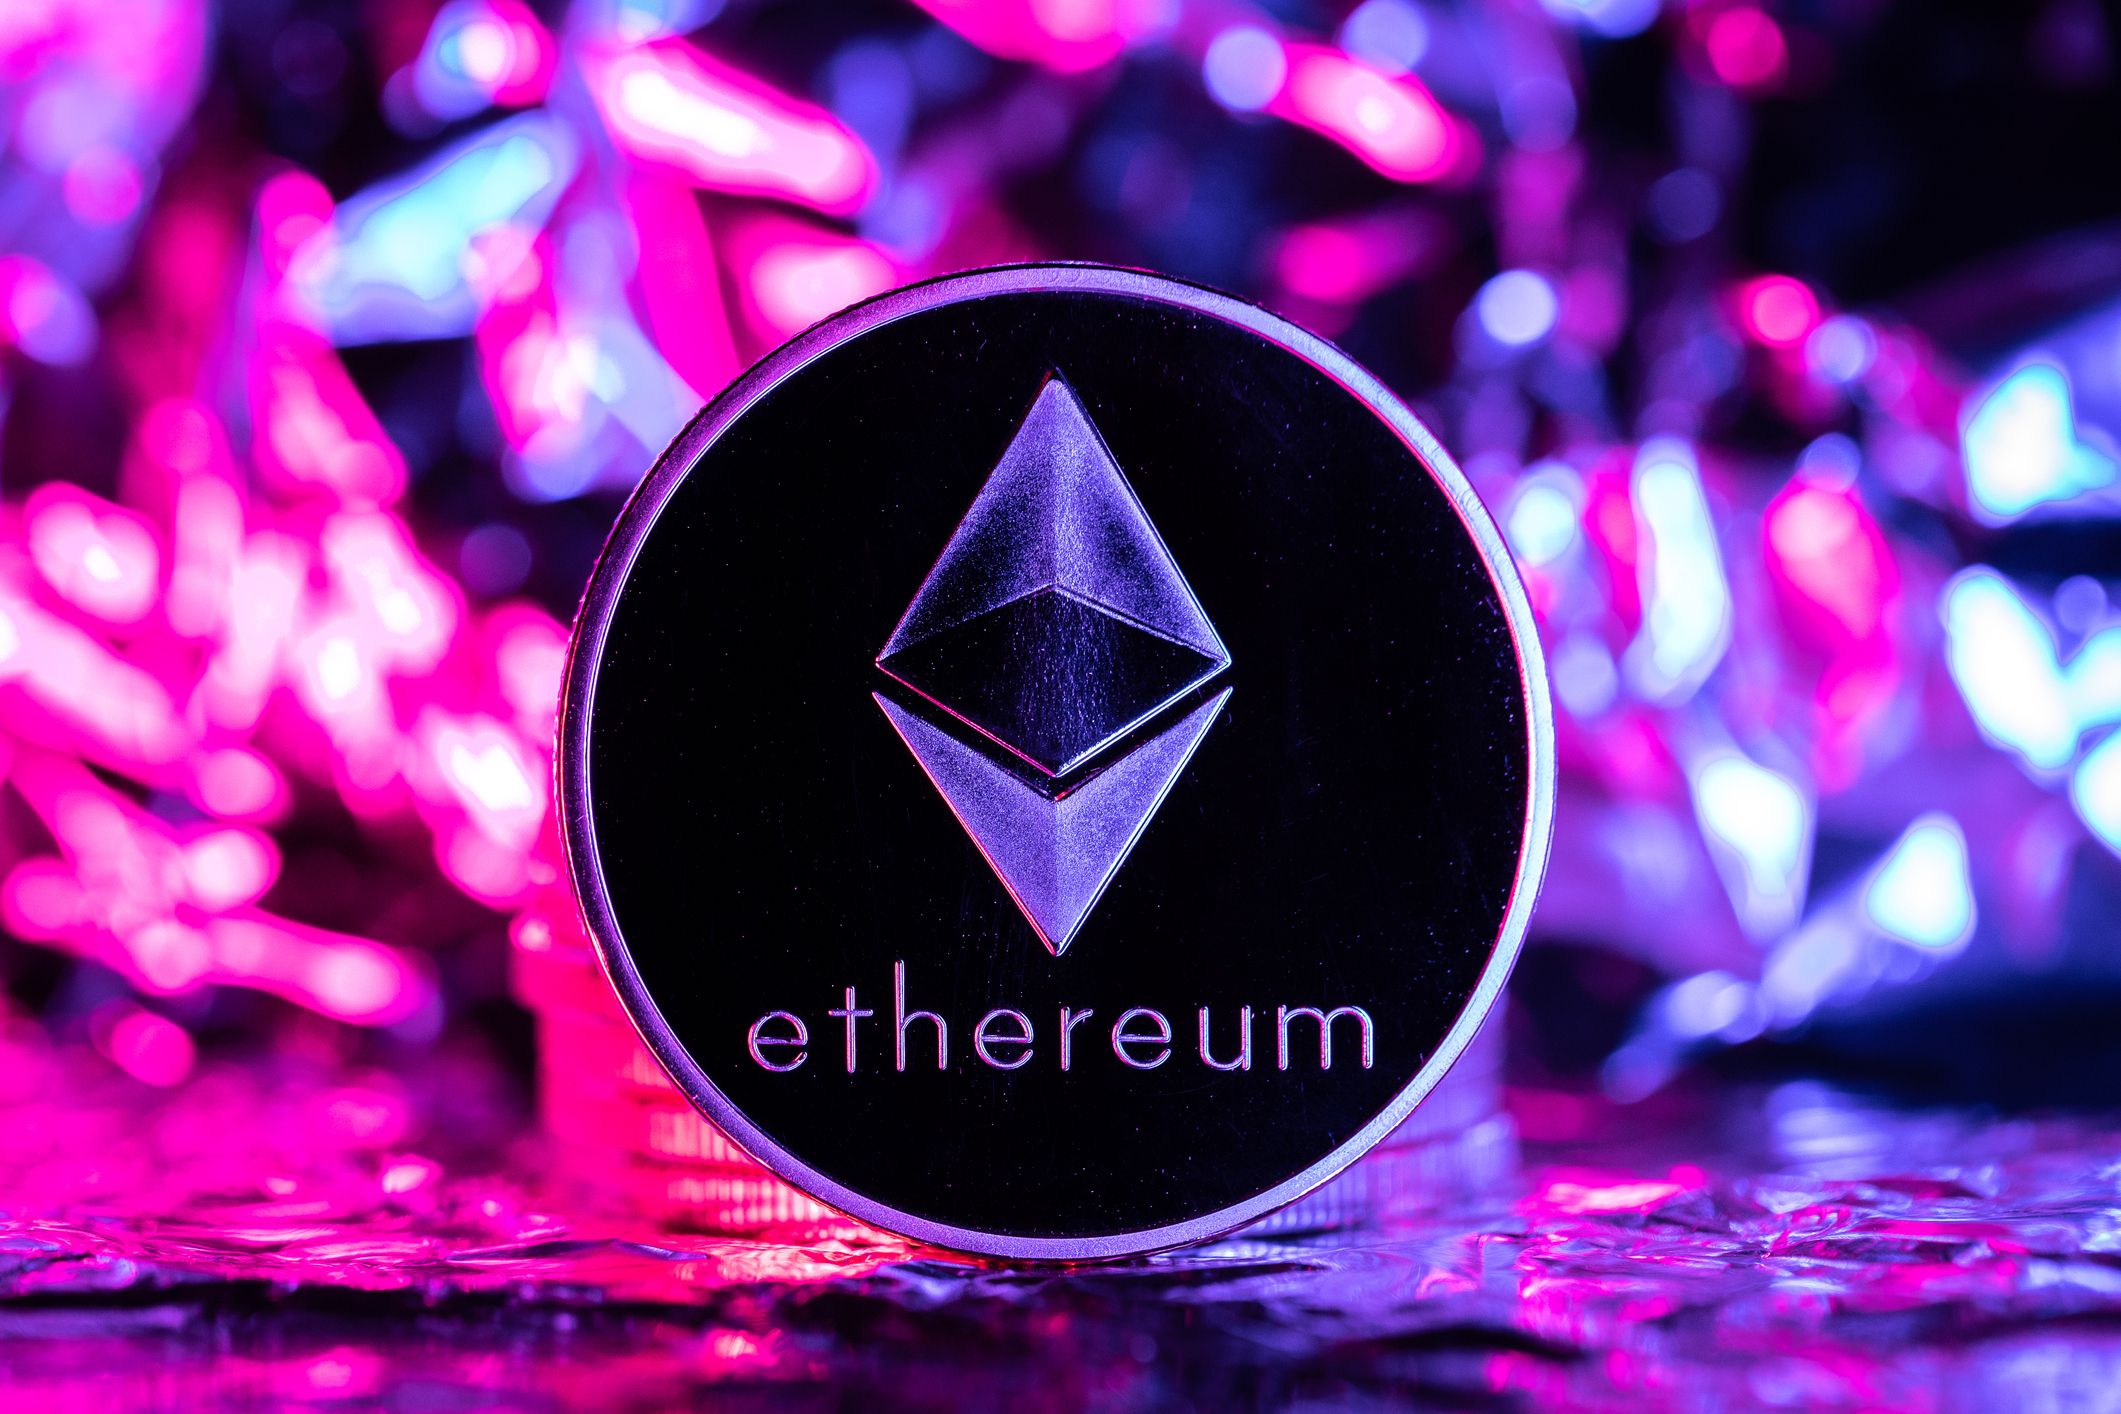 Ethereum Arbitrum Optimism Deneb hard fork, physical coin in front of an abstract background